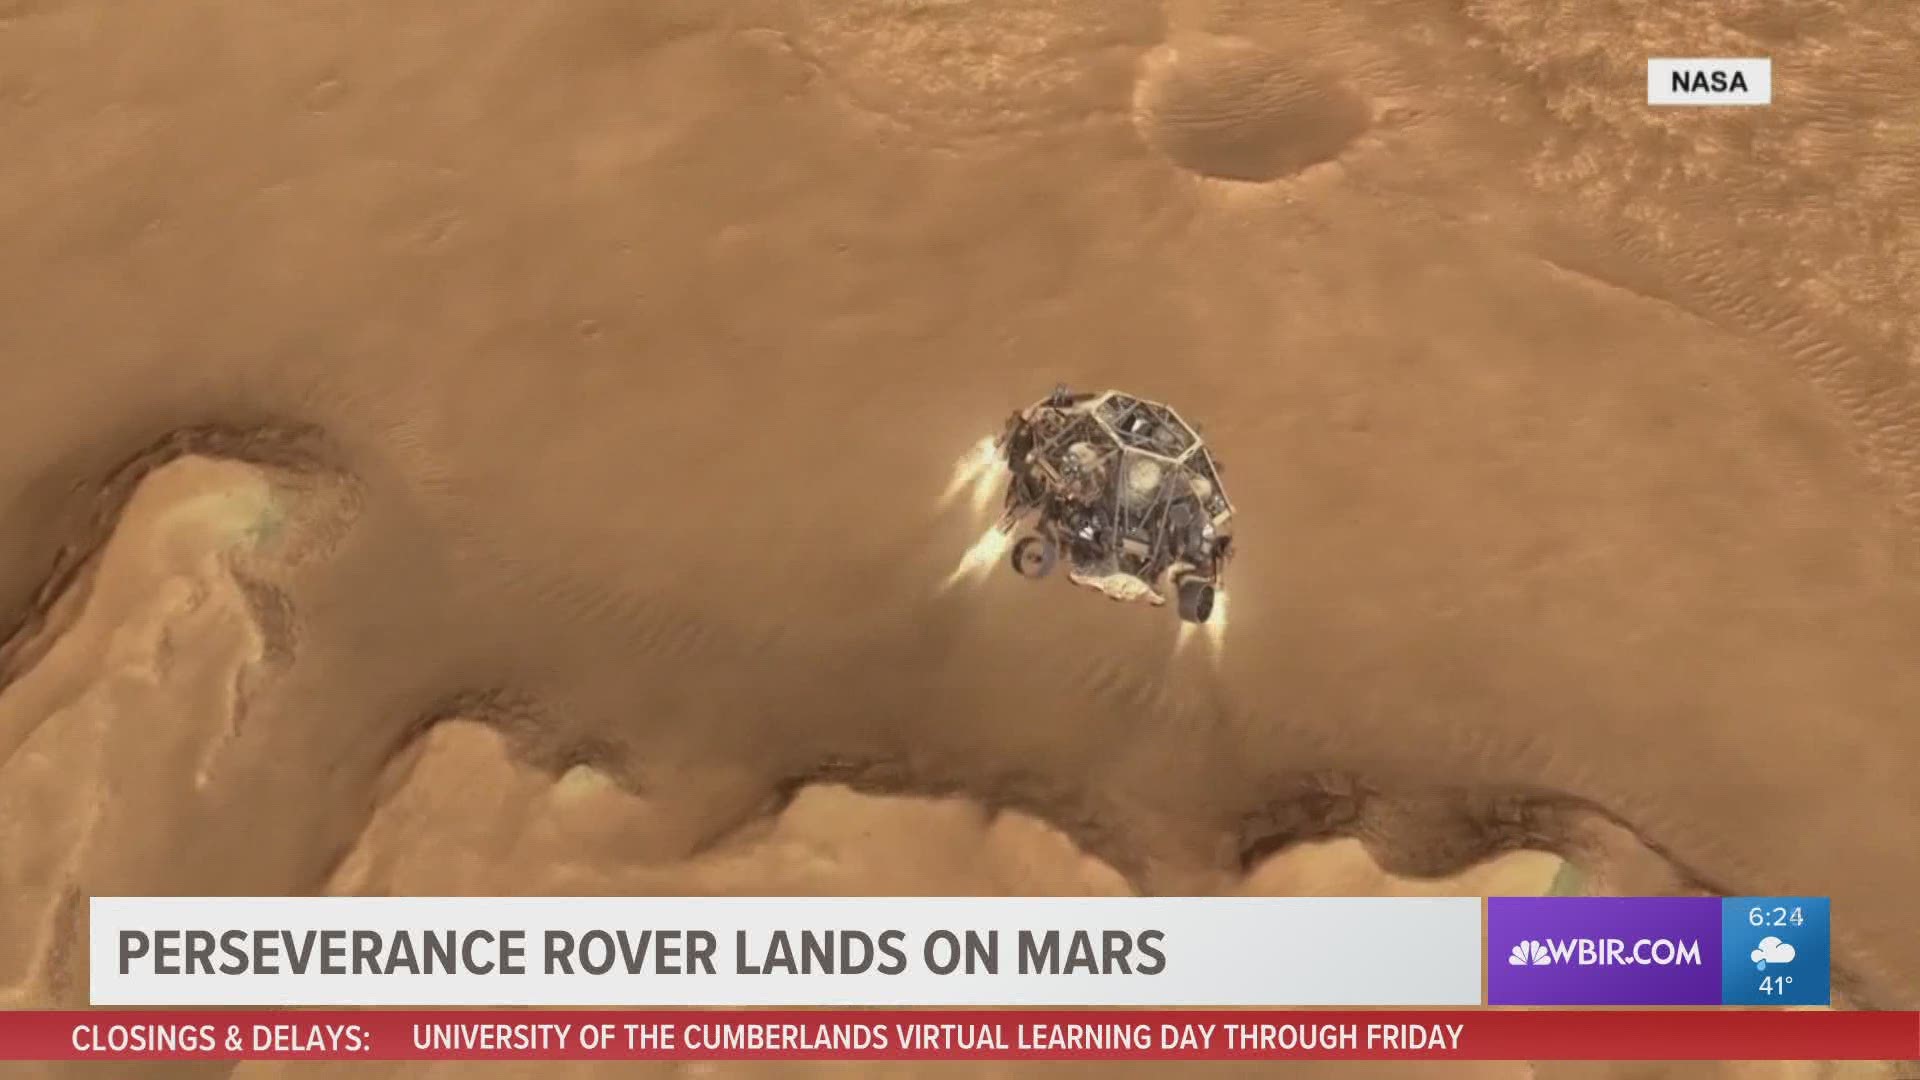 After the nearly 7-month flight, the rover started sending pictures back from the surface of Mars seconds after landing.